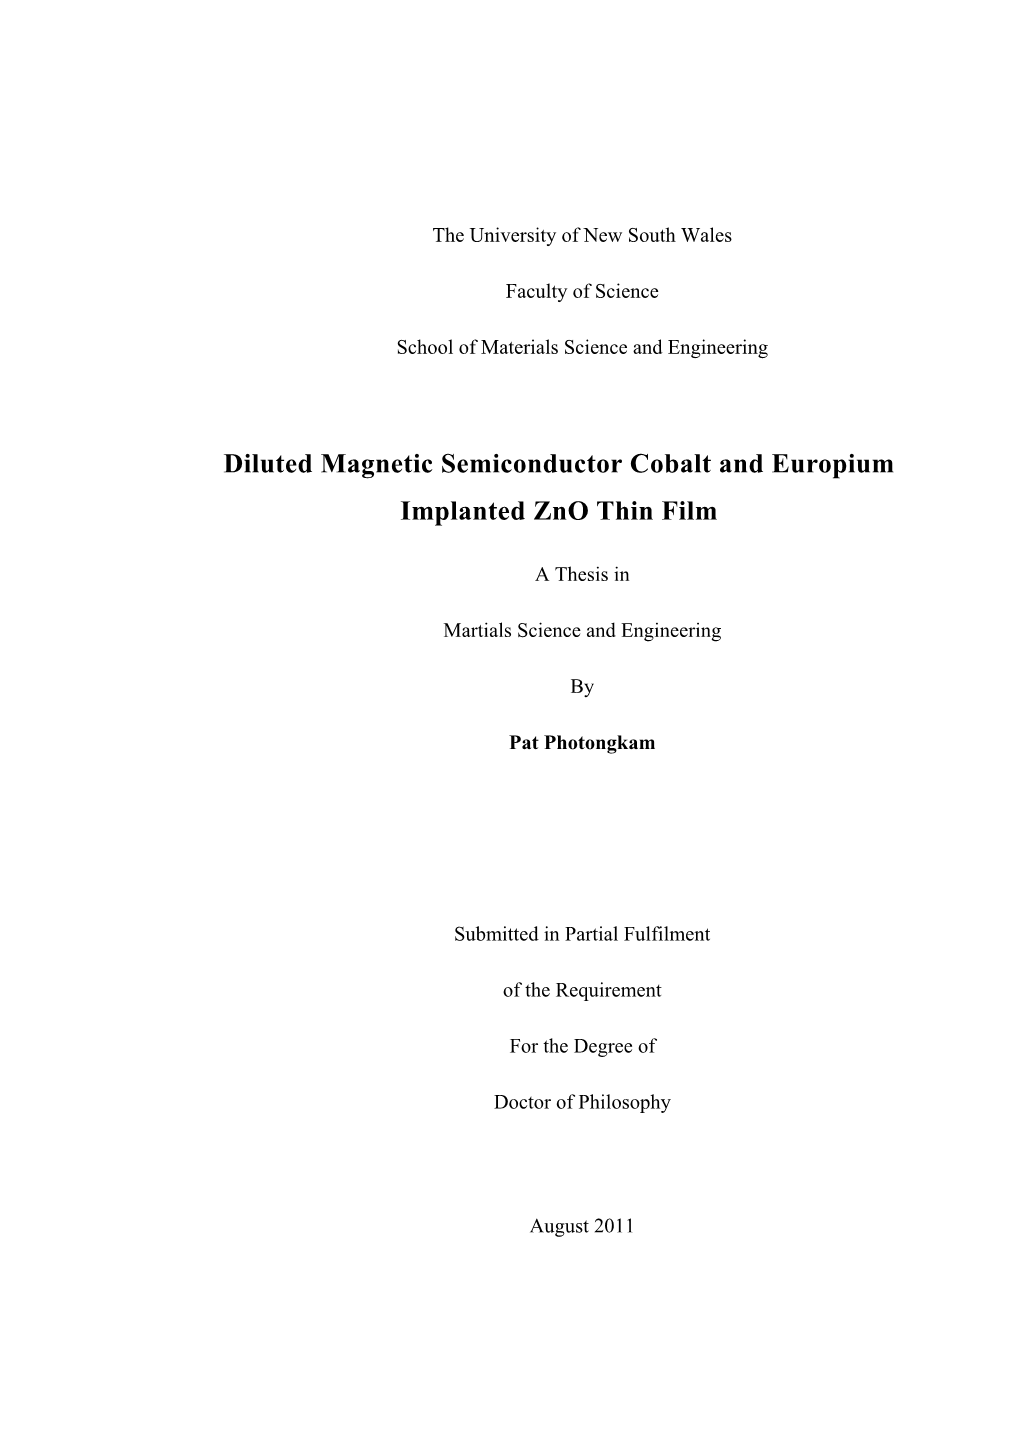 Diluted Magnetic Semiconductor Cobalt and Europium Implanted Zno Thin Film